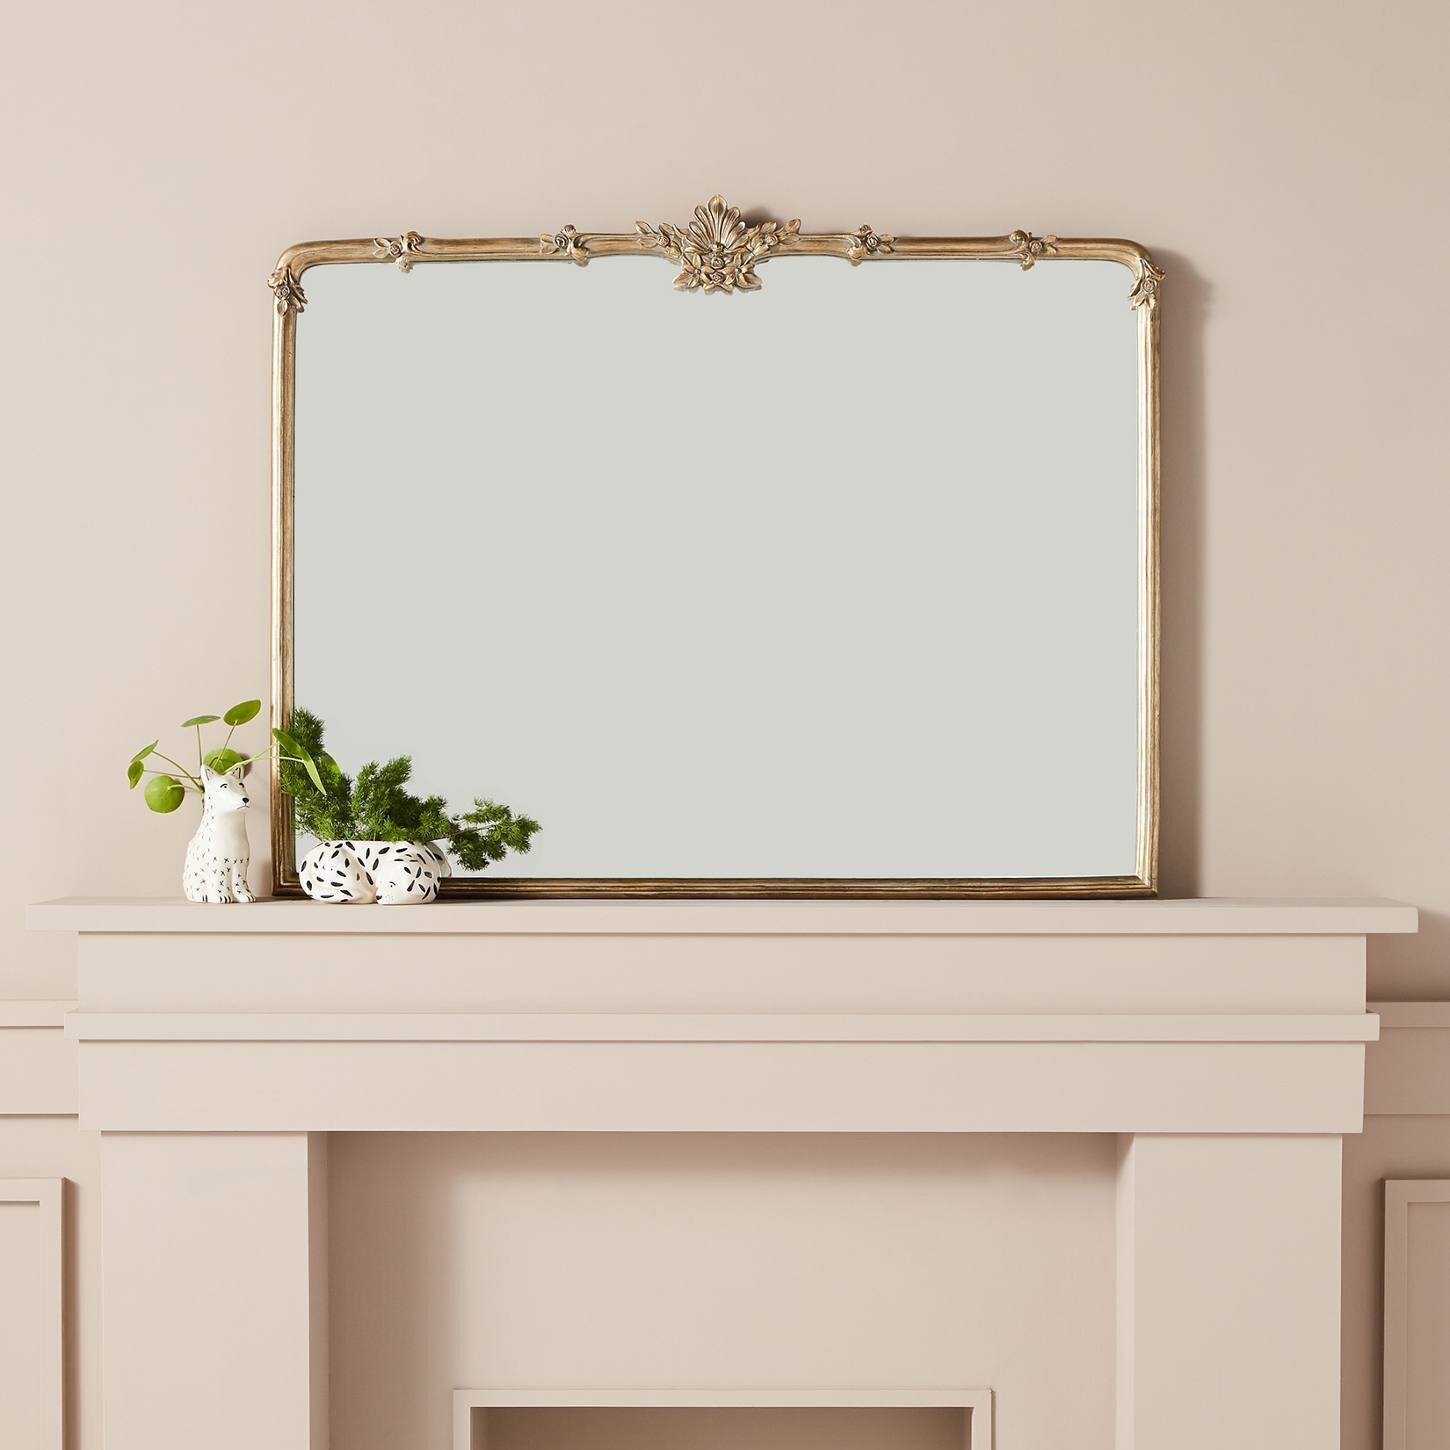 How to Style a Dresser Mirror